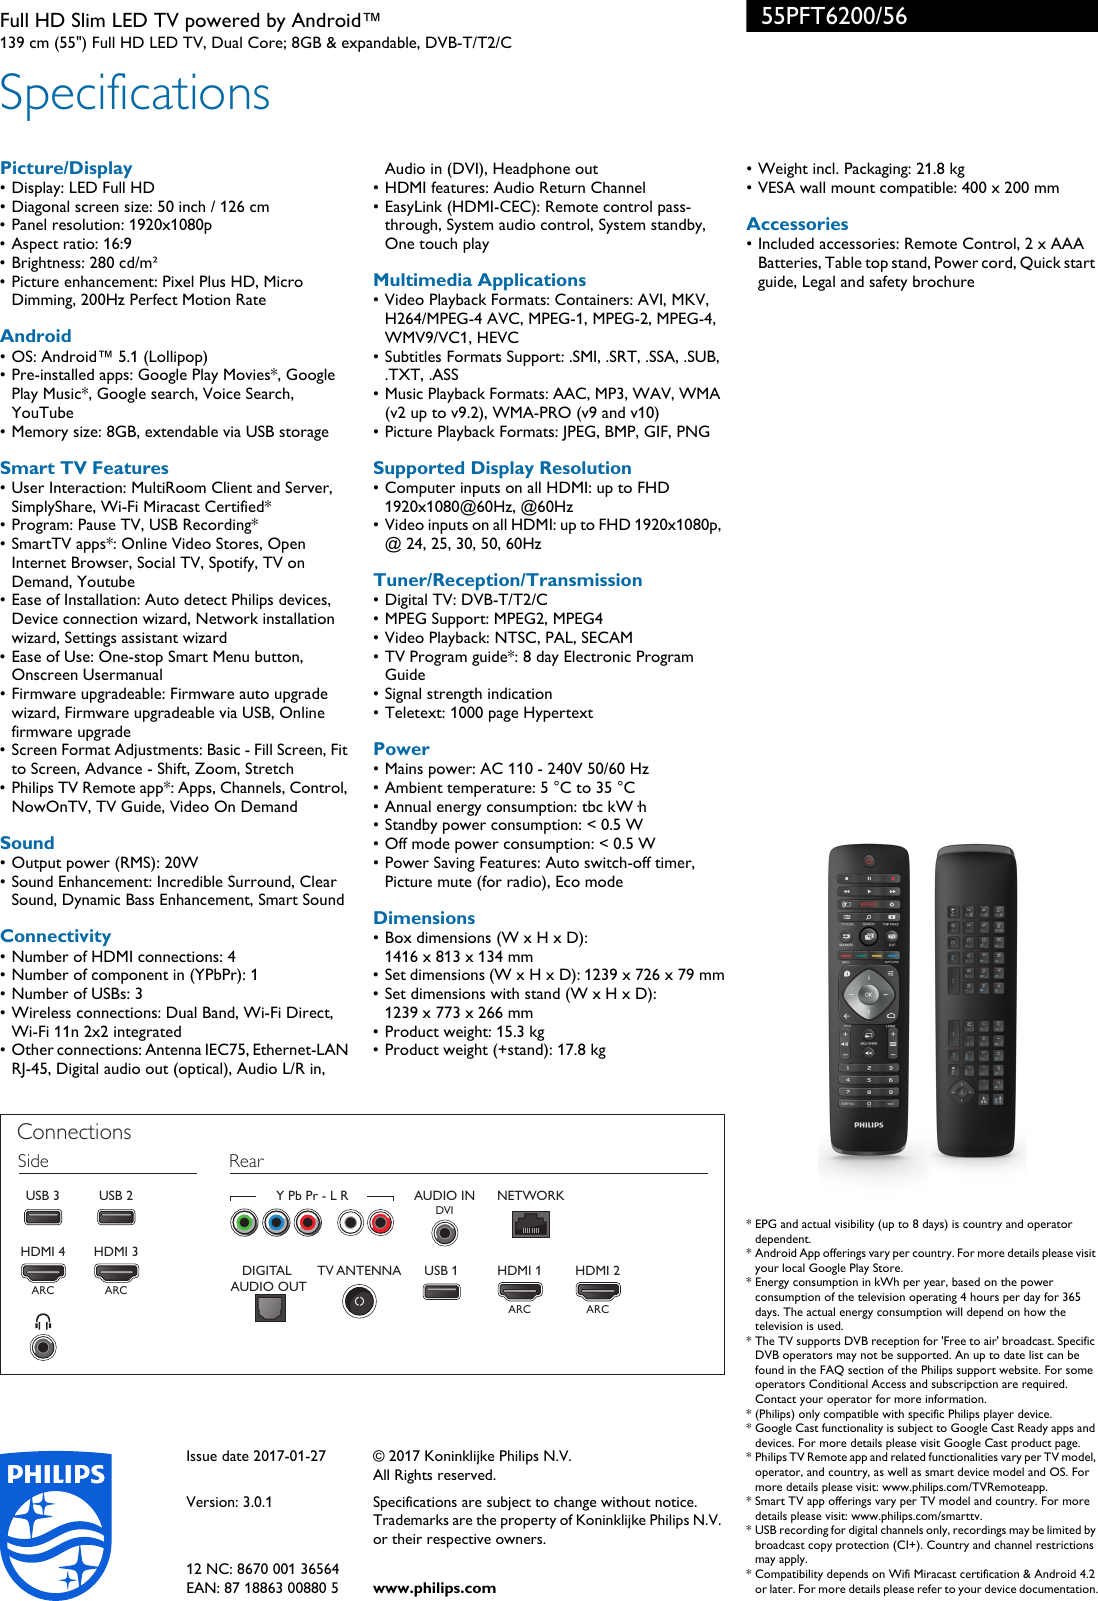 Page 3 of 3 - Philips 55PFT6200/56 Full HD Slim LED TV Powered By Android™ With Pixel Plus Leaflet 55pft6200 56 Pss